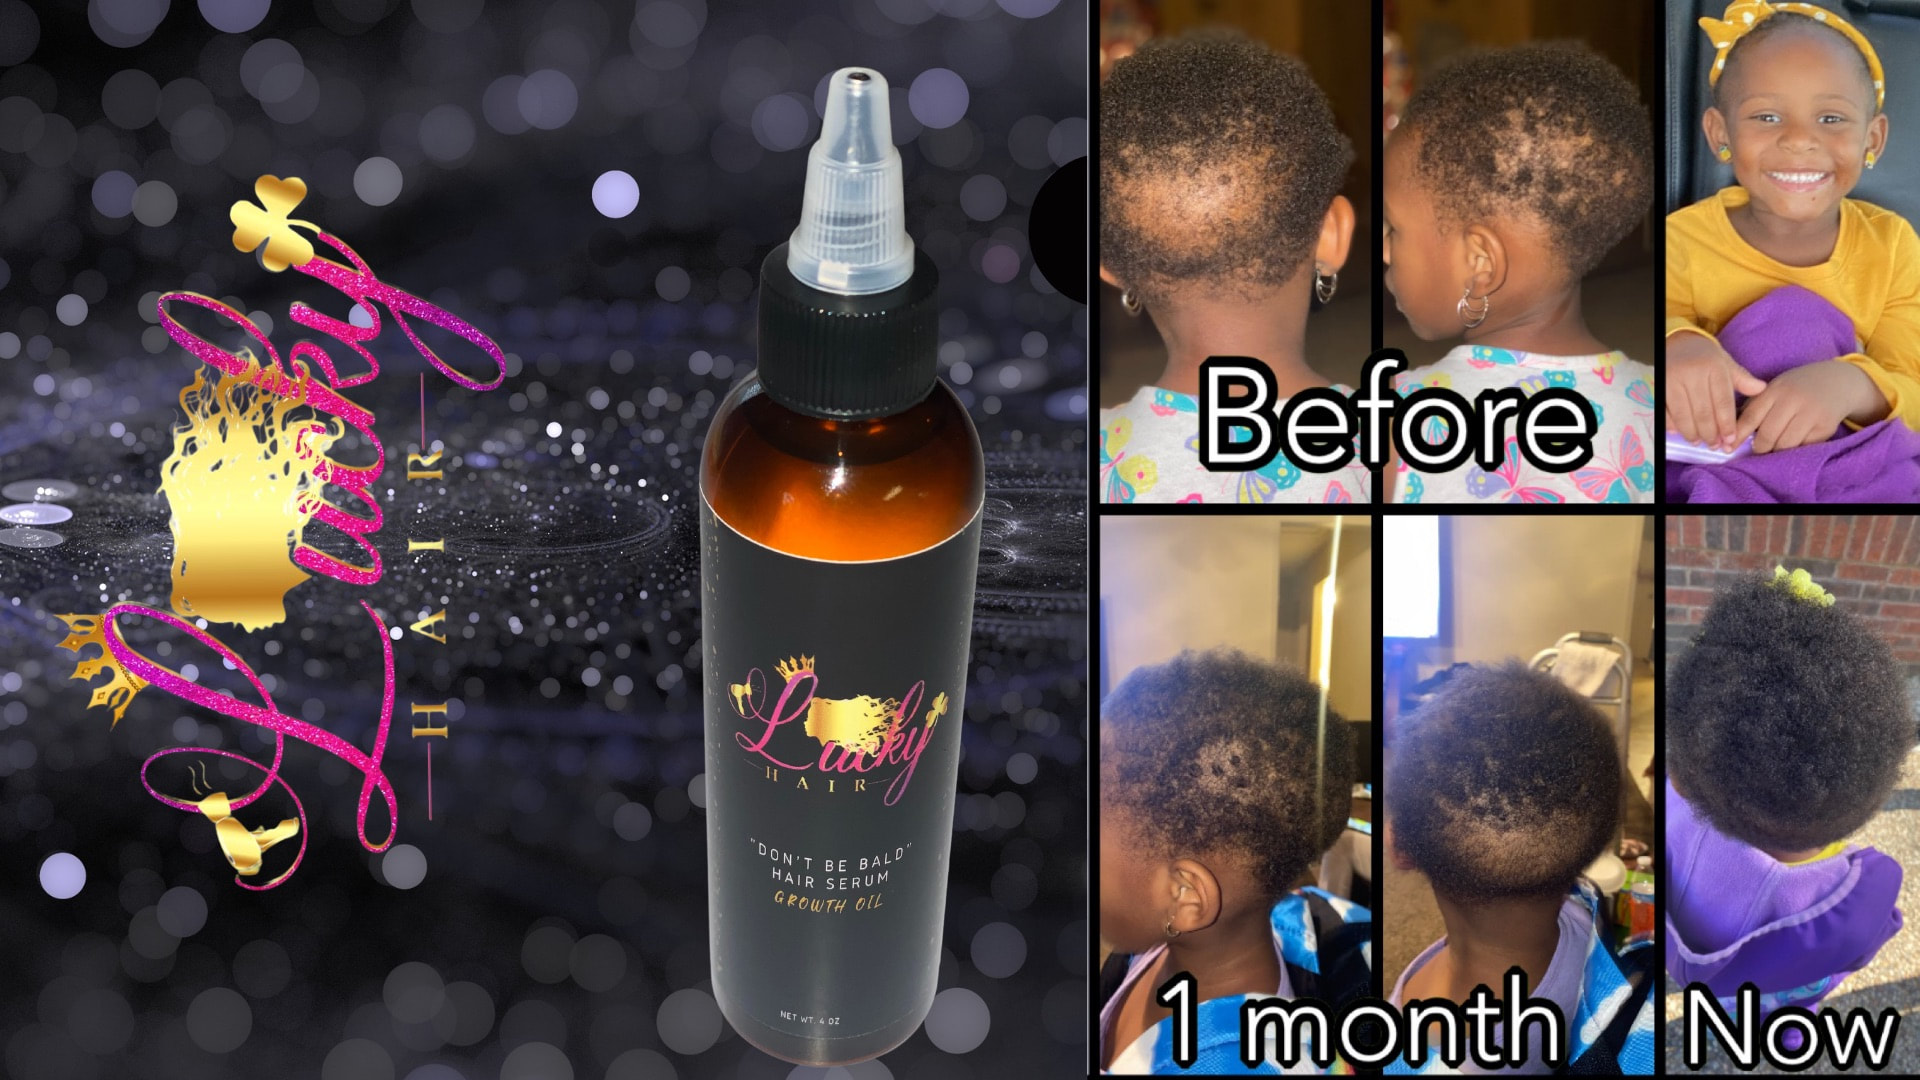 Say Goodbye to Bald Spots with 7 Day Ginger Germinal Hair Growth Essence Oil